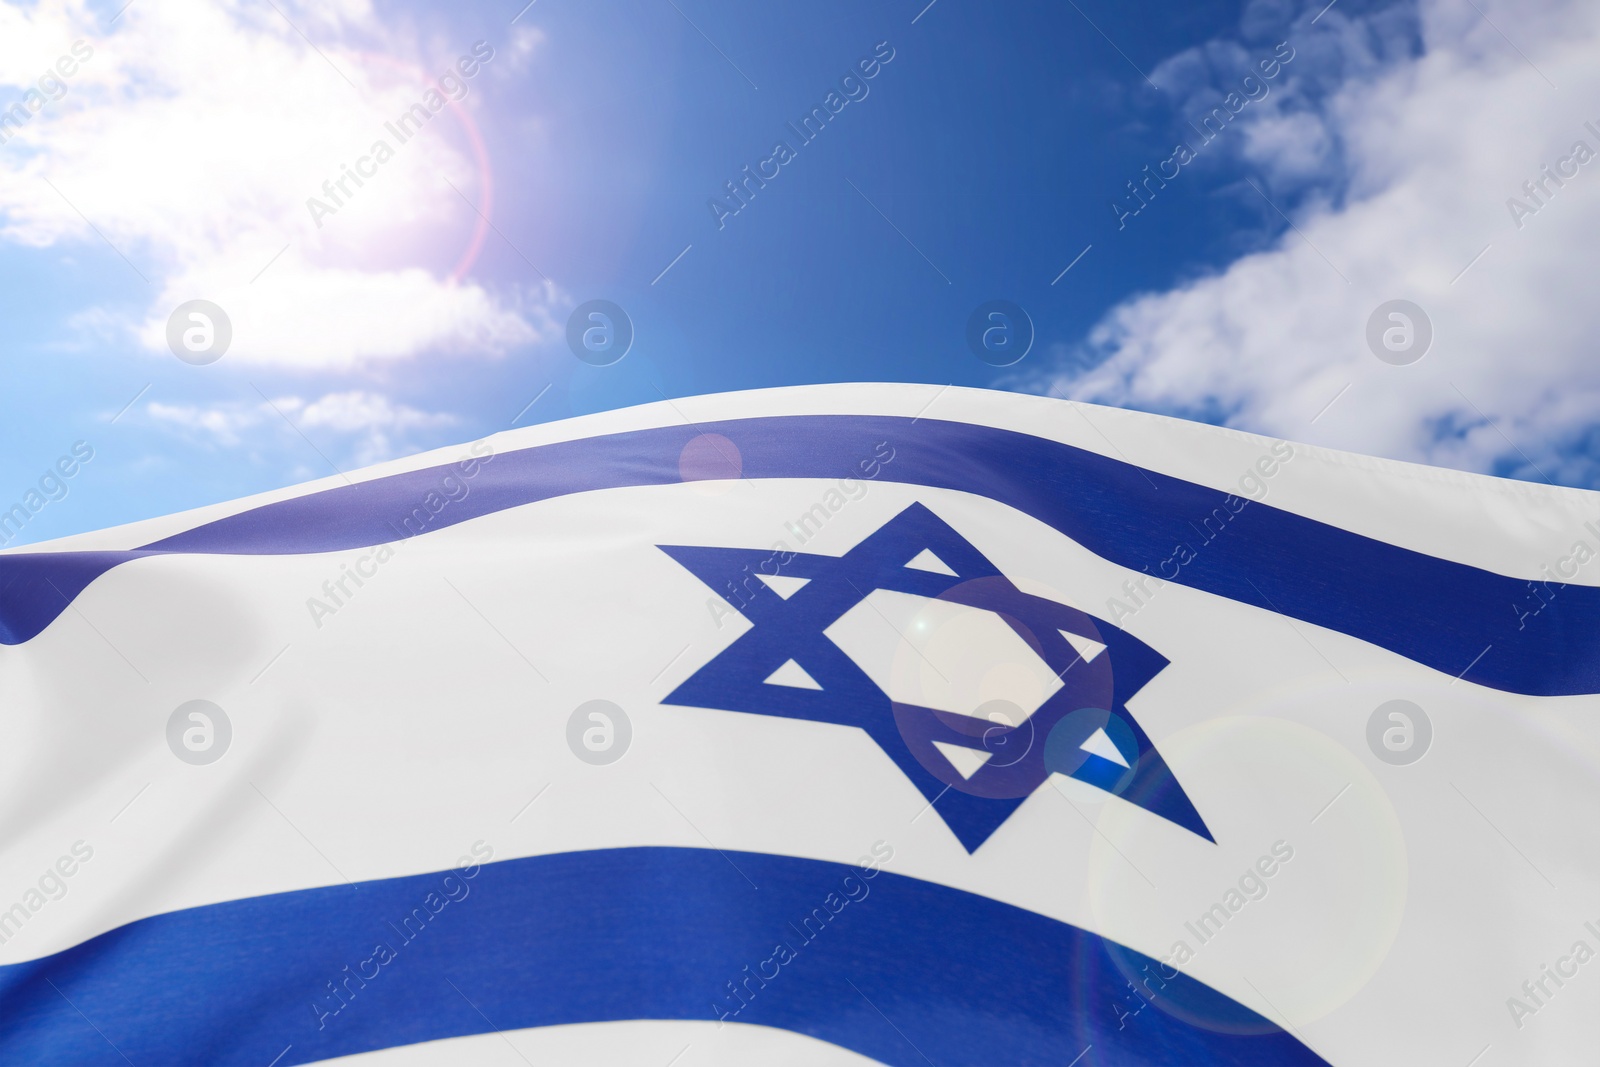 Image of National flag of Israel against blue sky with clouds